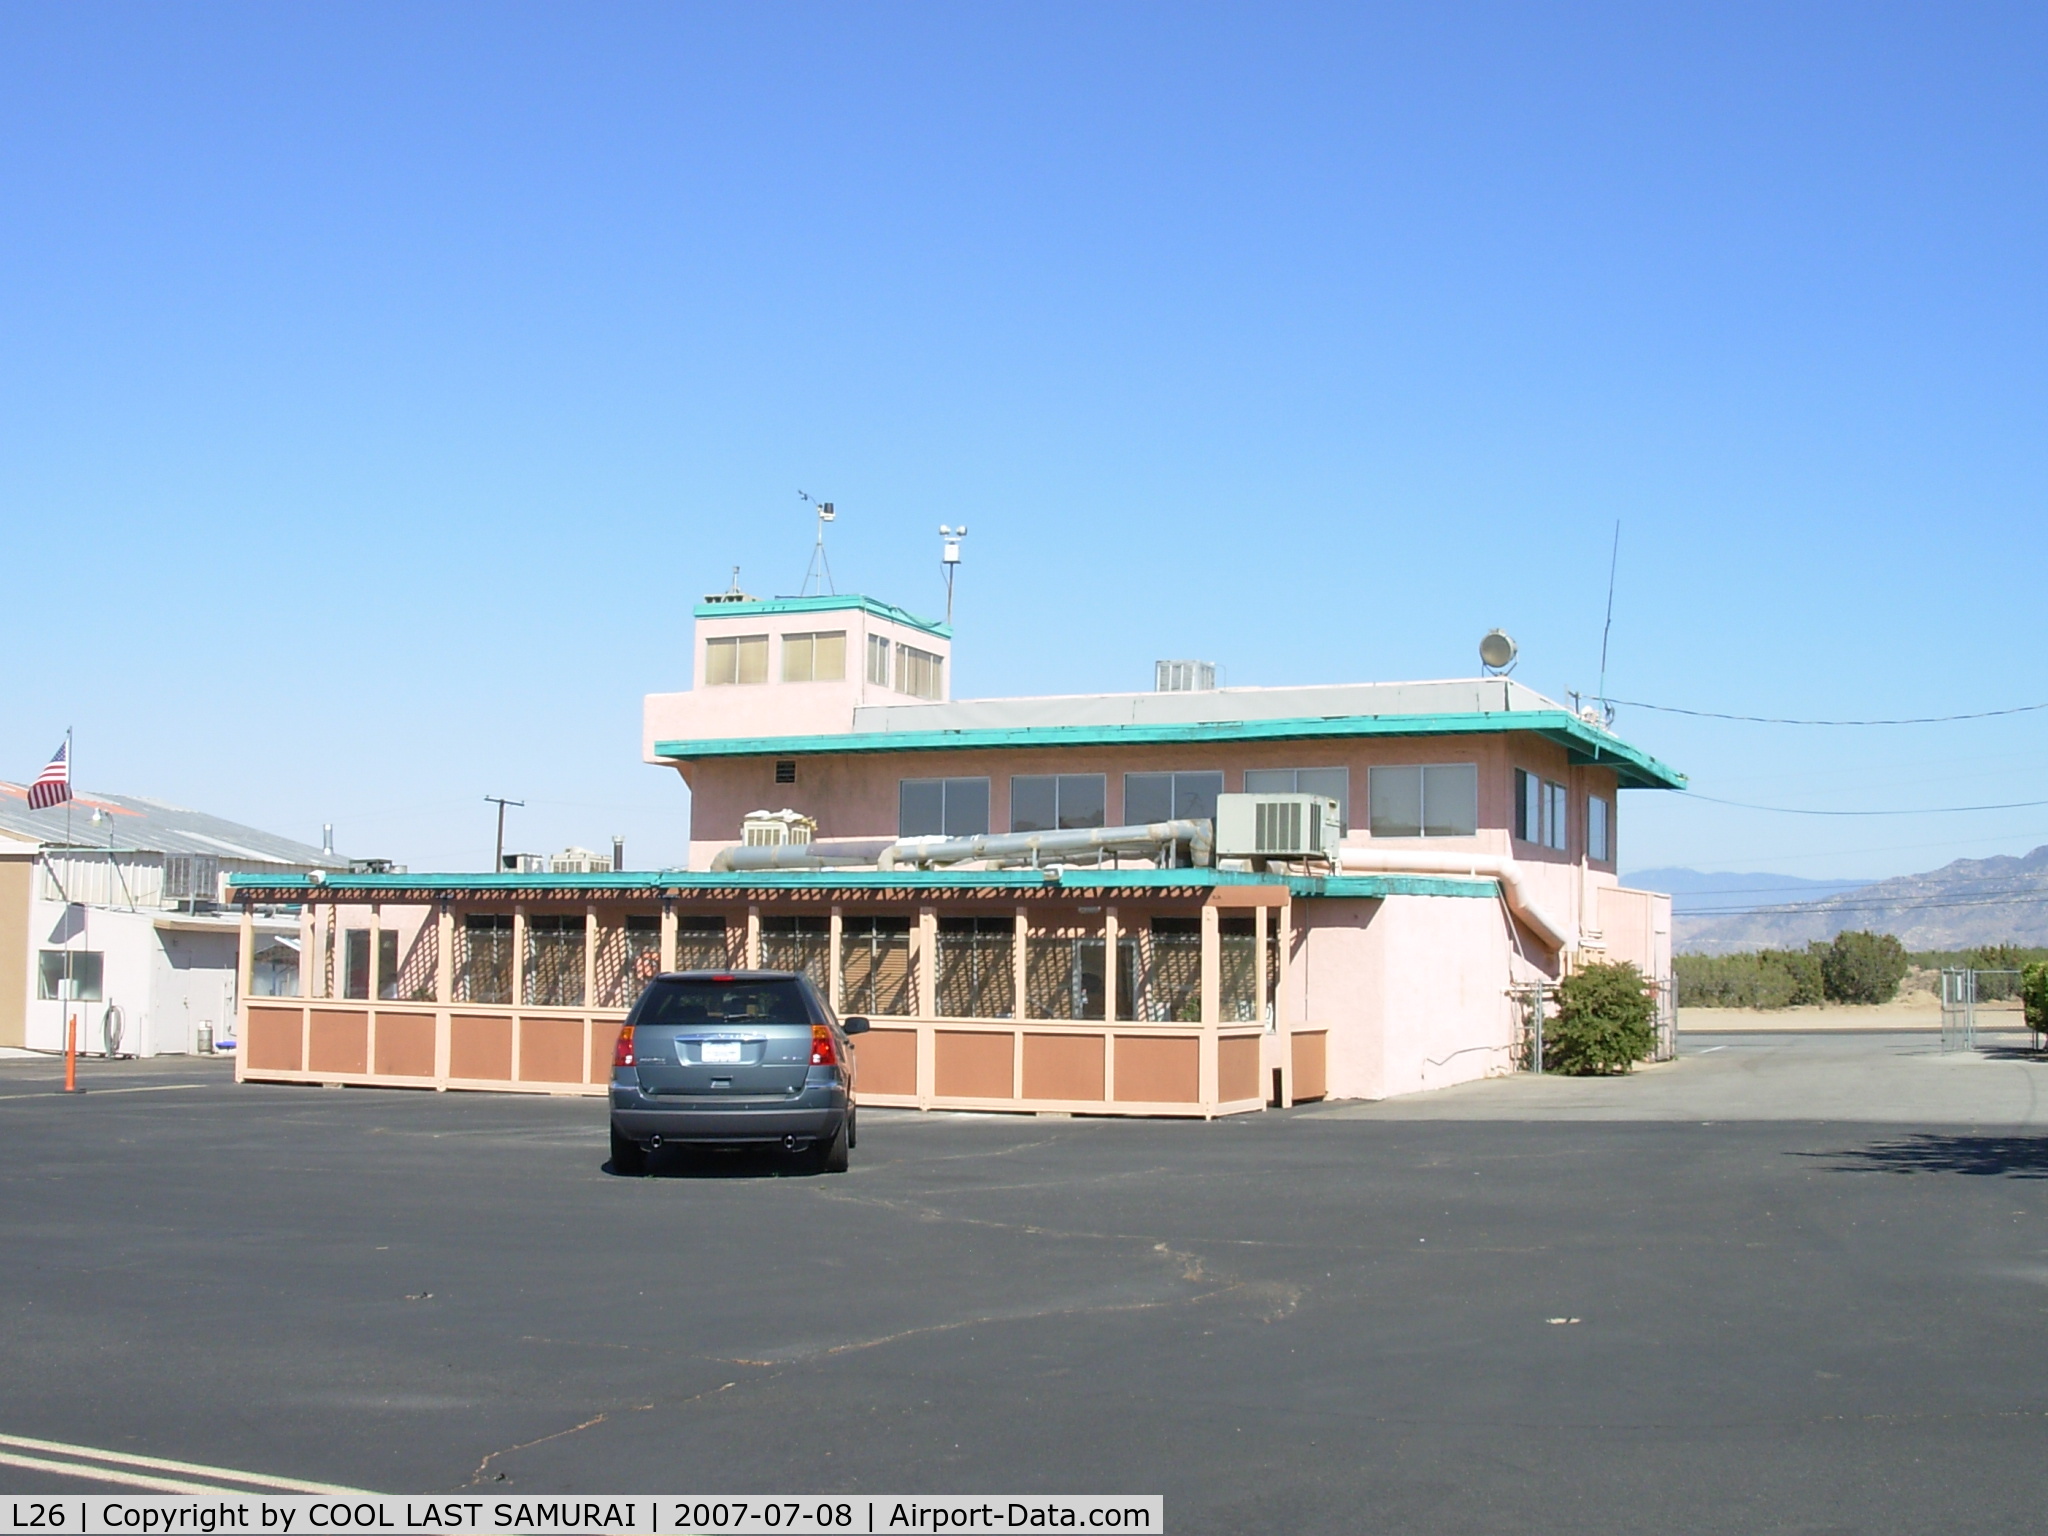 Hesperia Airport (L26) - Restaurant and partking